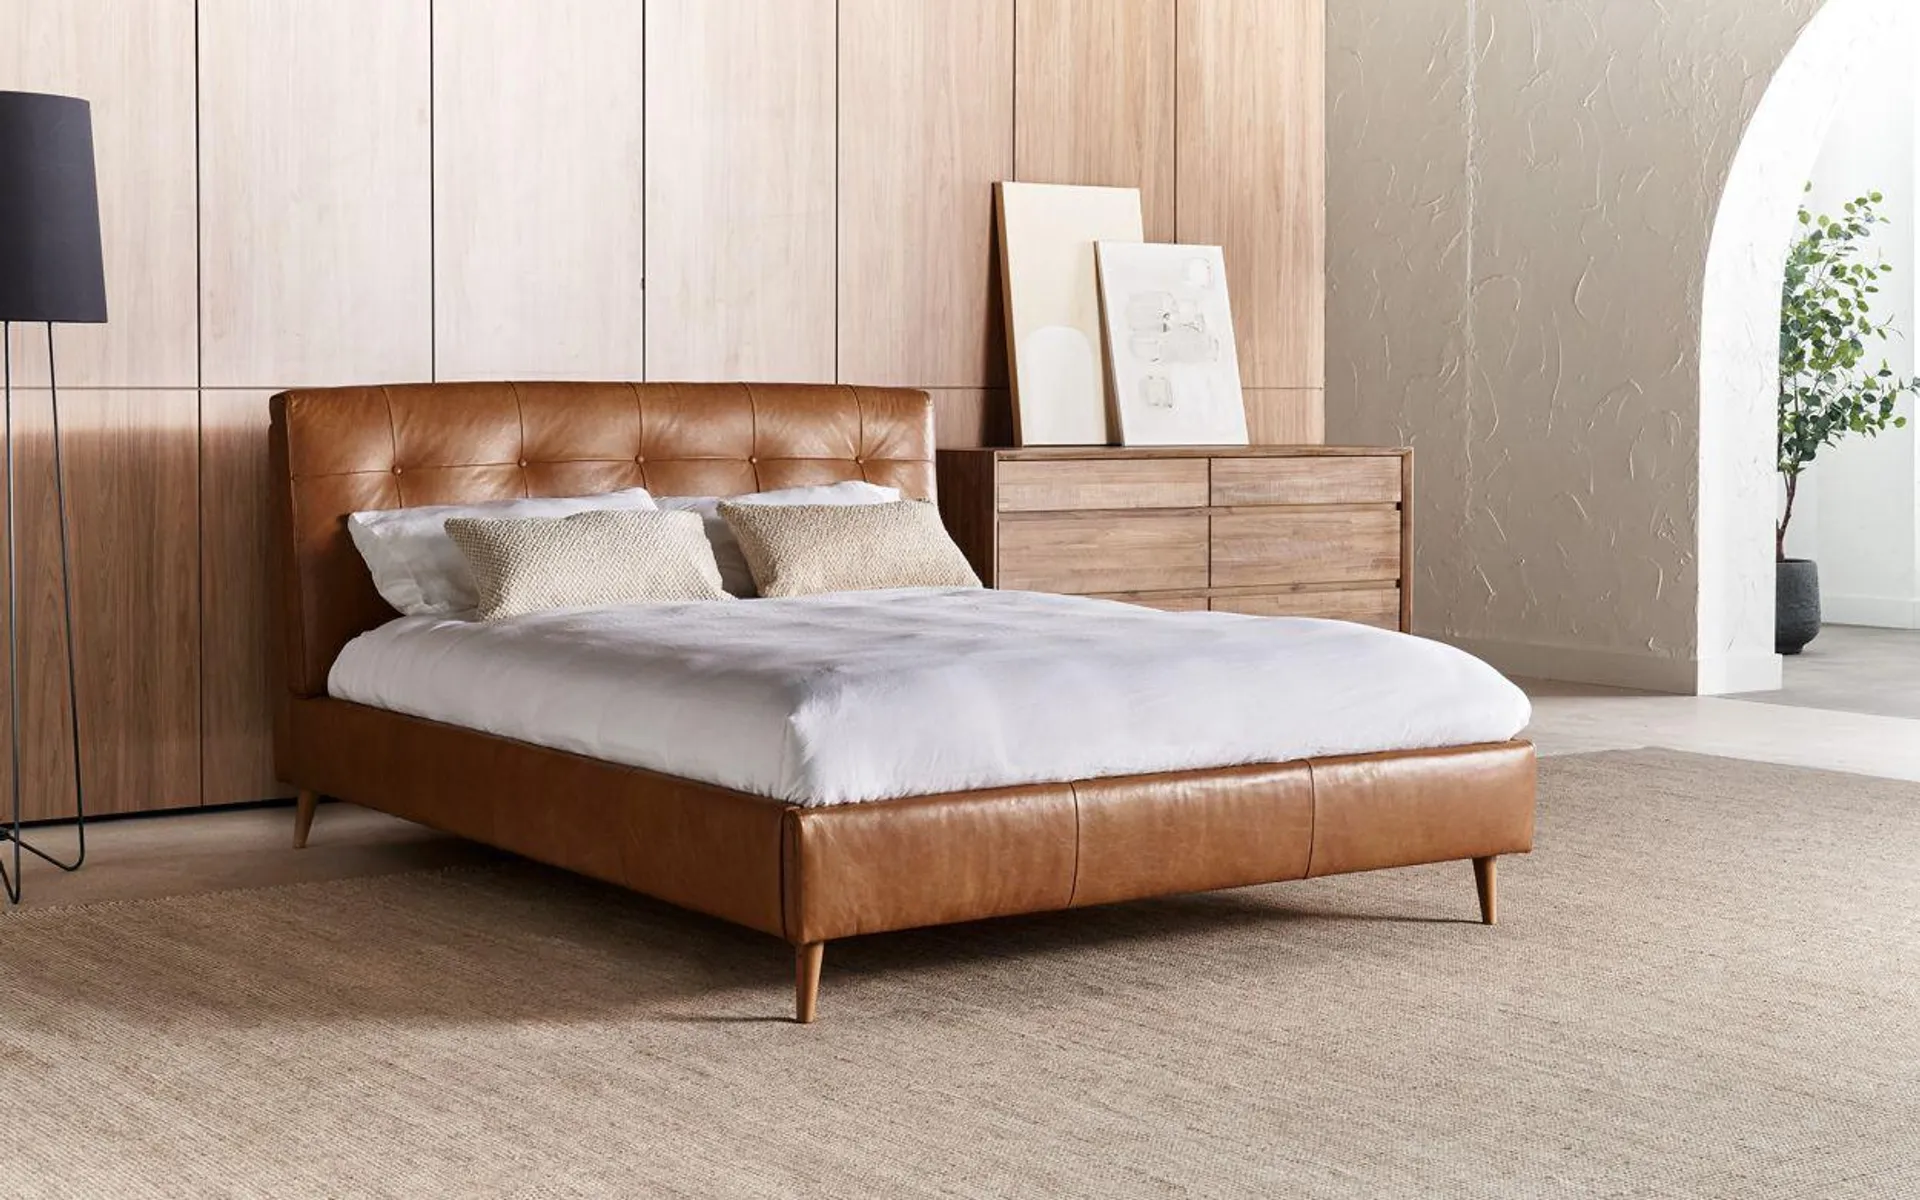 Luzzi queen bed frame in vintage leather tan